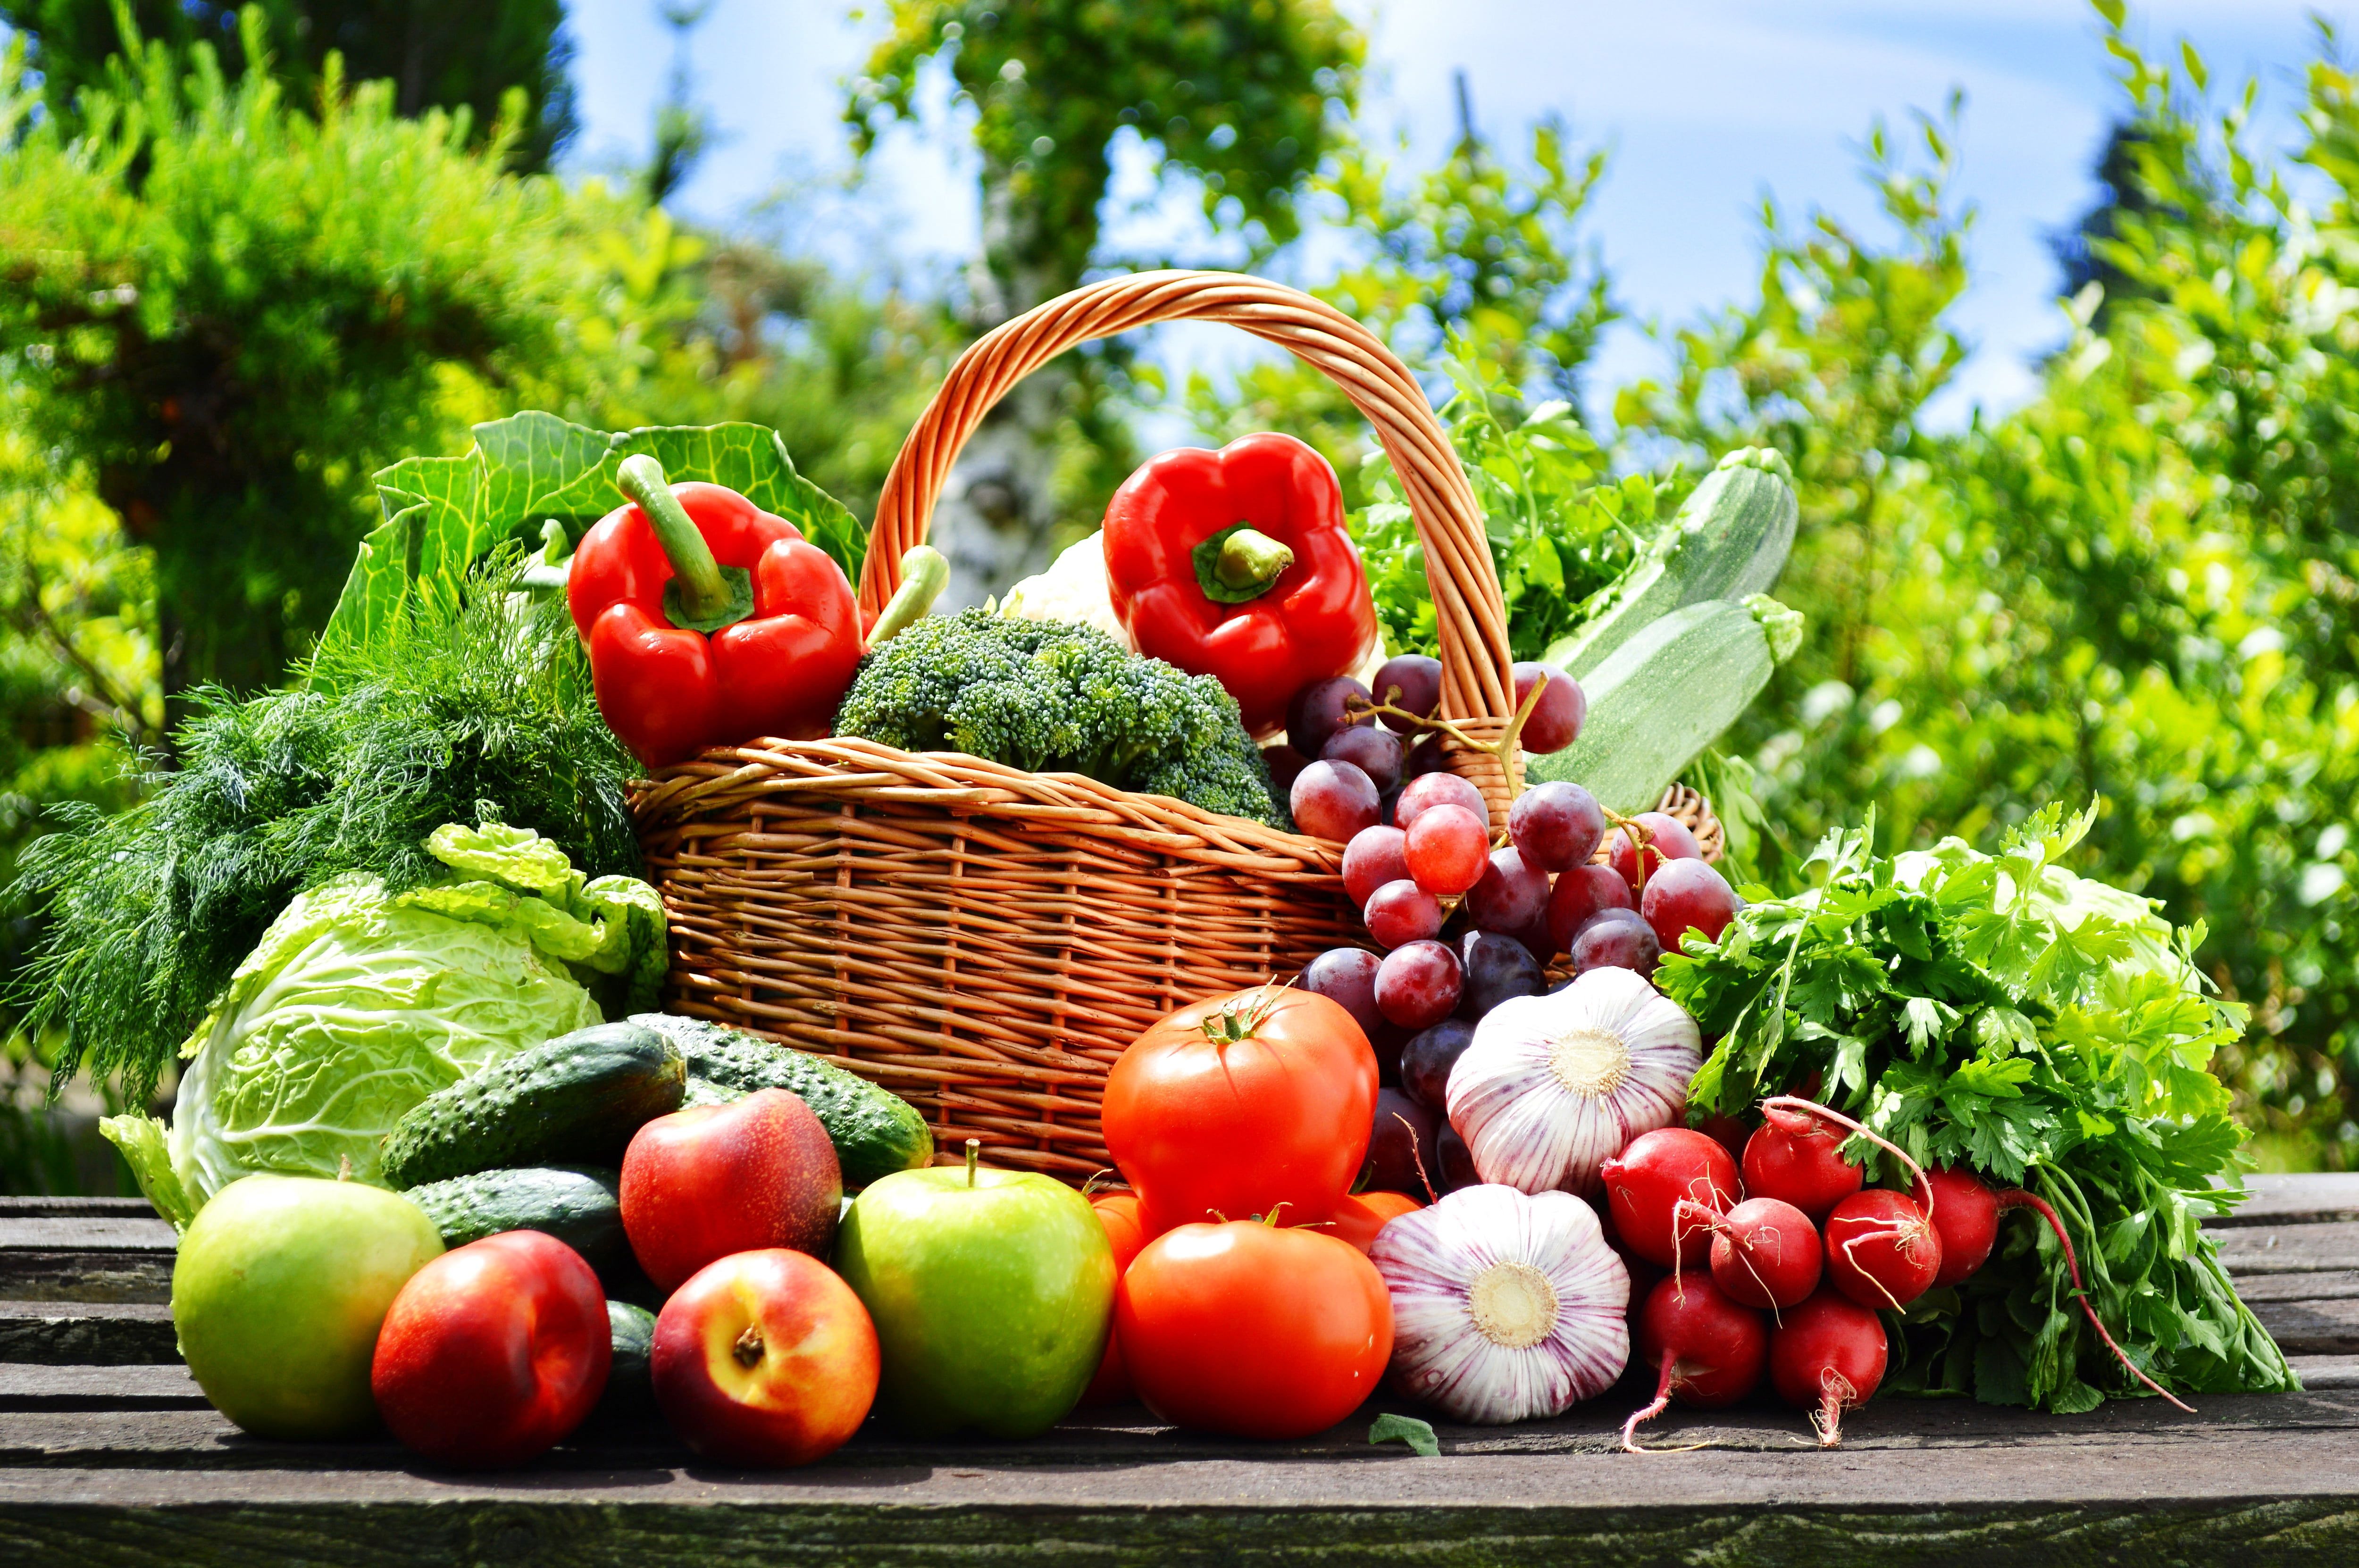 assorted fruits and vegetables #nature #basket #apples #grapes #pepper # fruit #vegetables #tomatoes #cabbage #c. Benefits of organic food, Grape apple, Vegetables